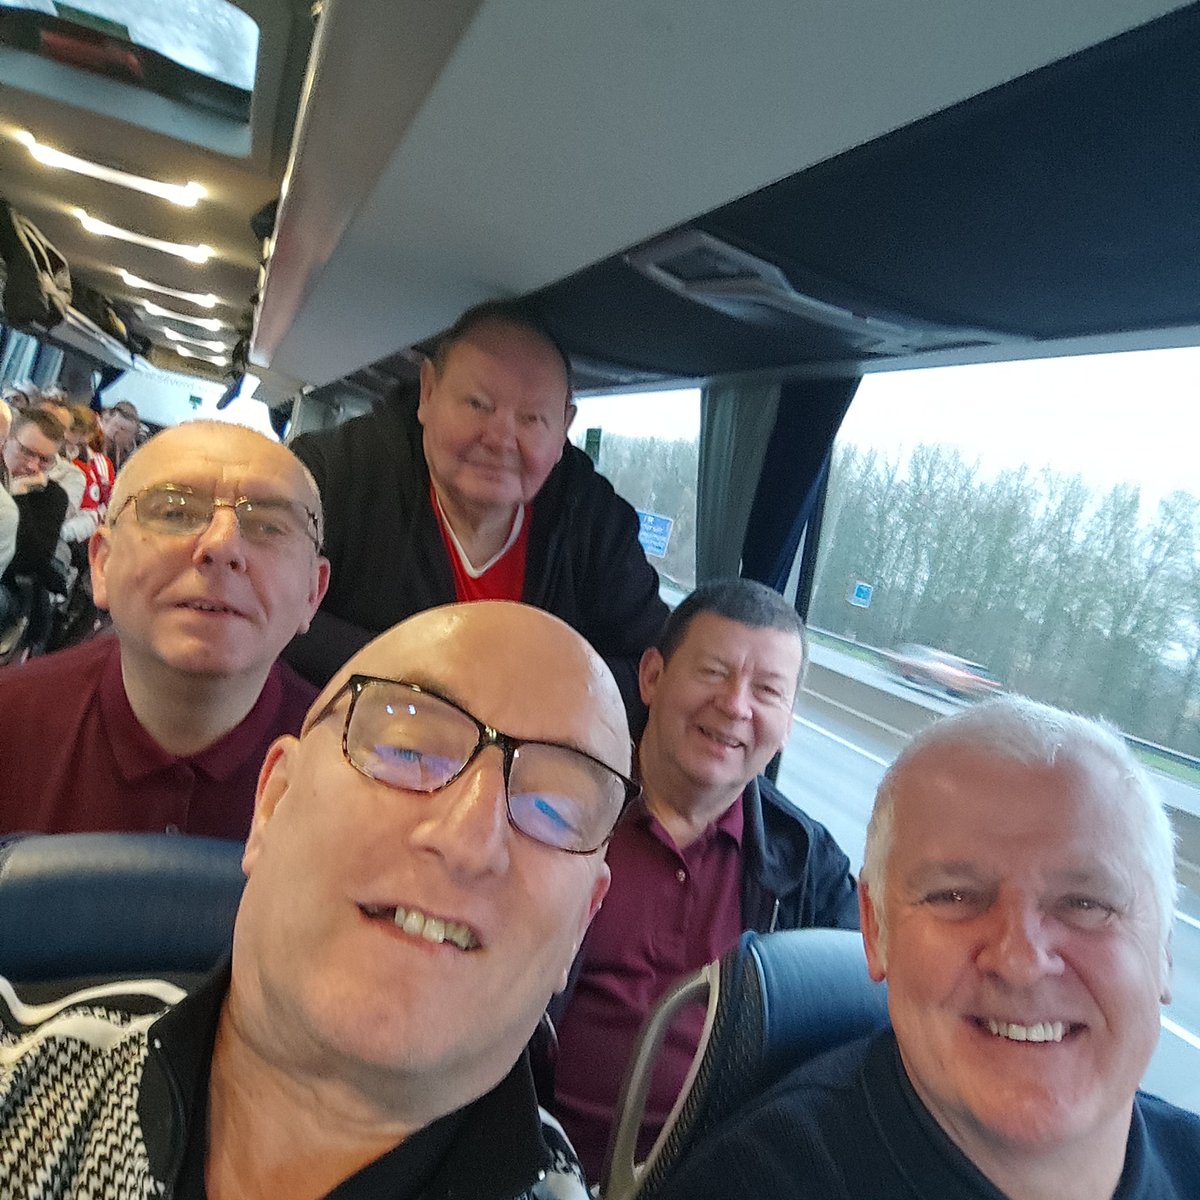 Off to Brighton to watch @NFFC with the @Official_NFSC Gedling Branch C'mon you Mighty Reds awaydays absolutely love em ⚽⚽⚽🍺🍺🍺